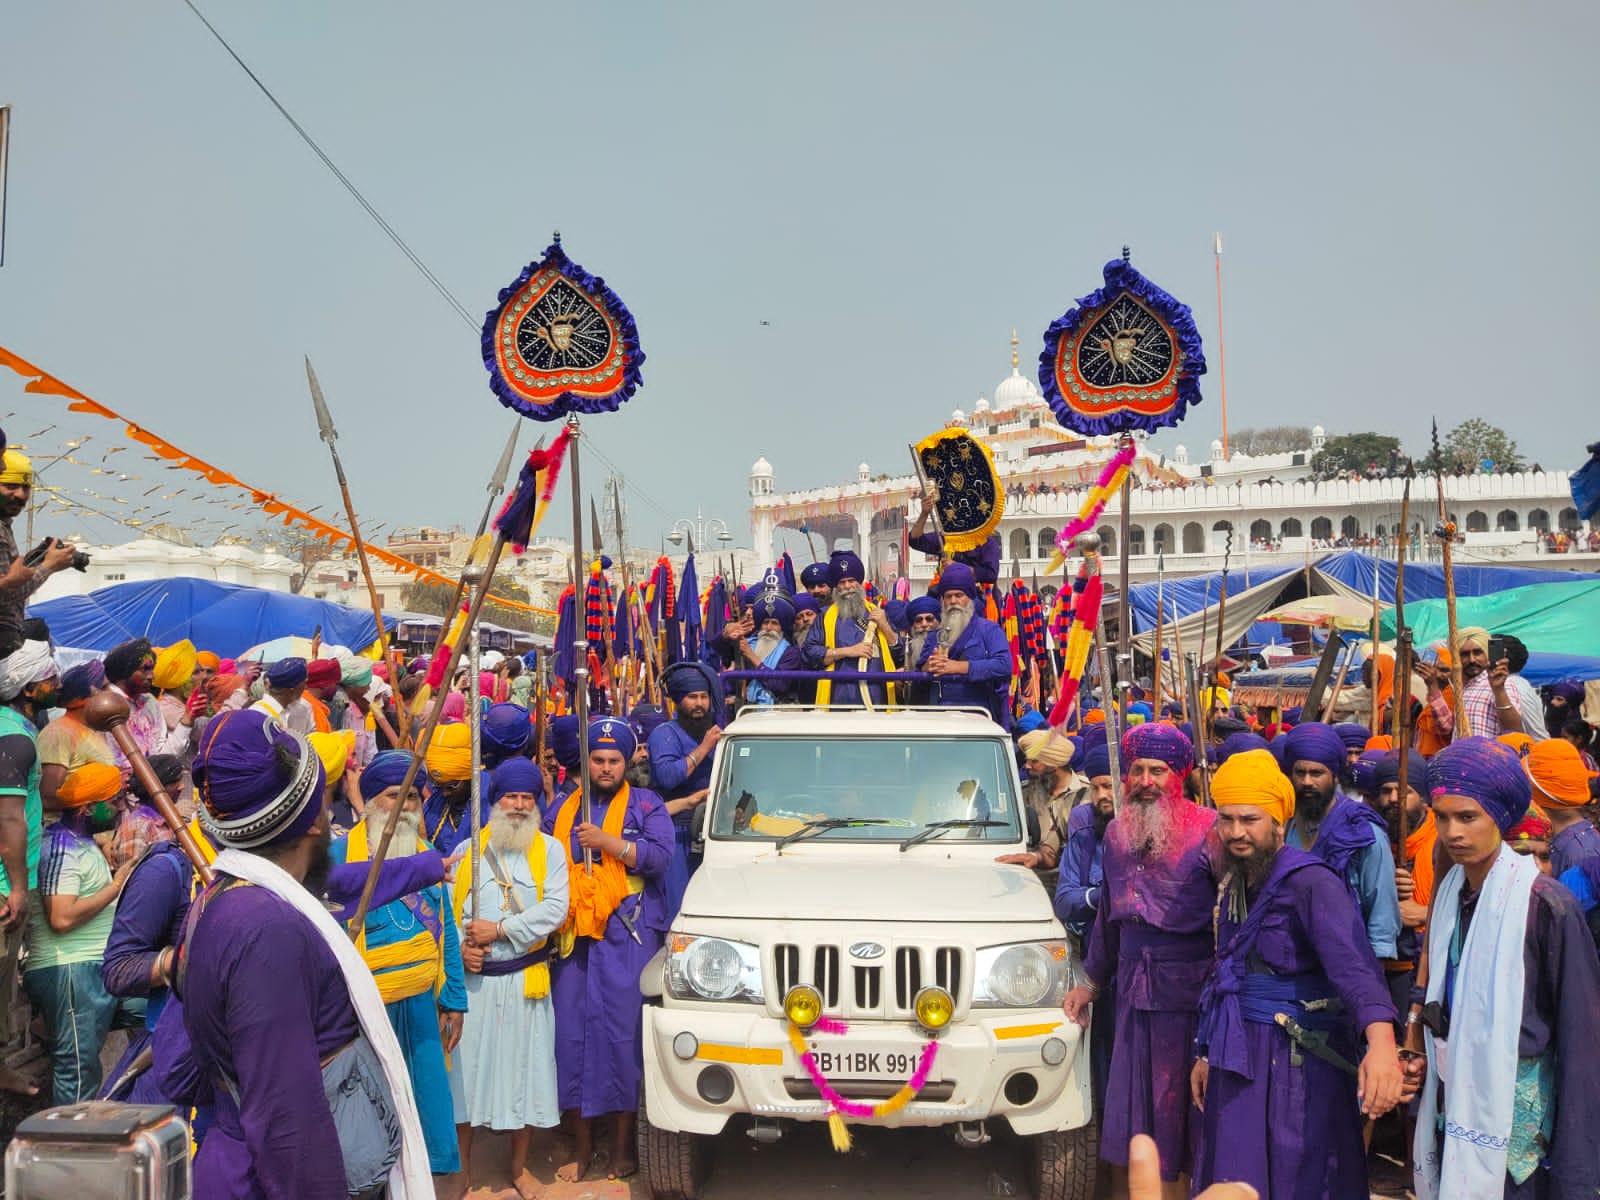 Hola Mohalla festival concludes with display of martial arts by Nihangs